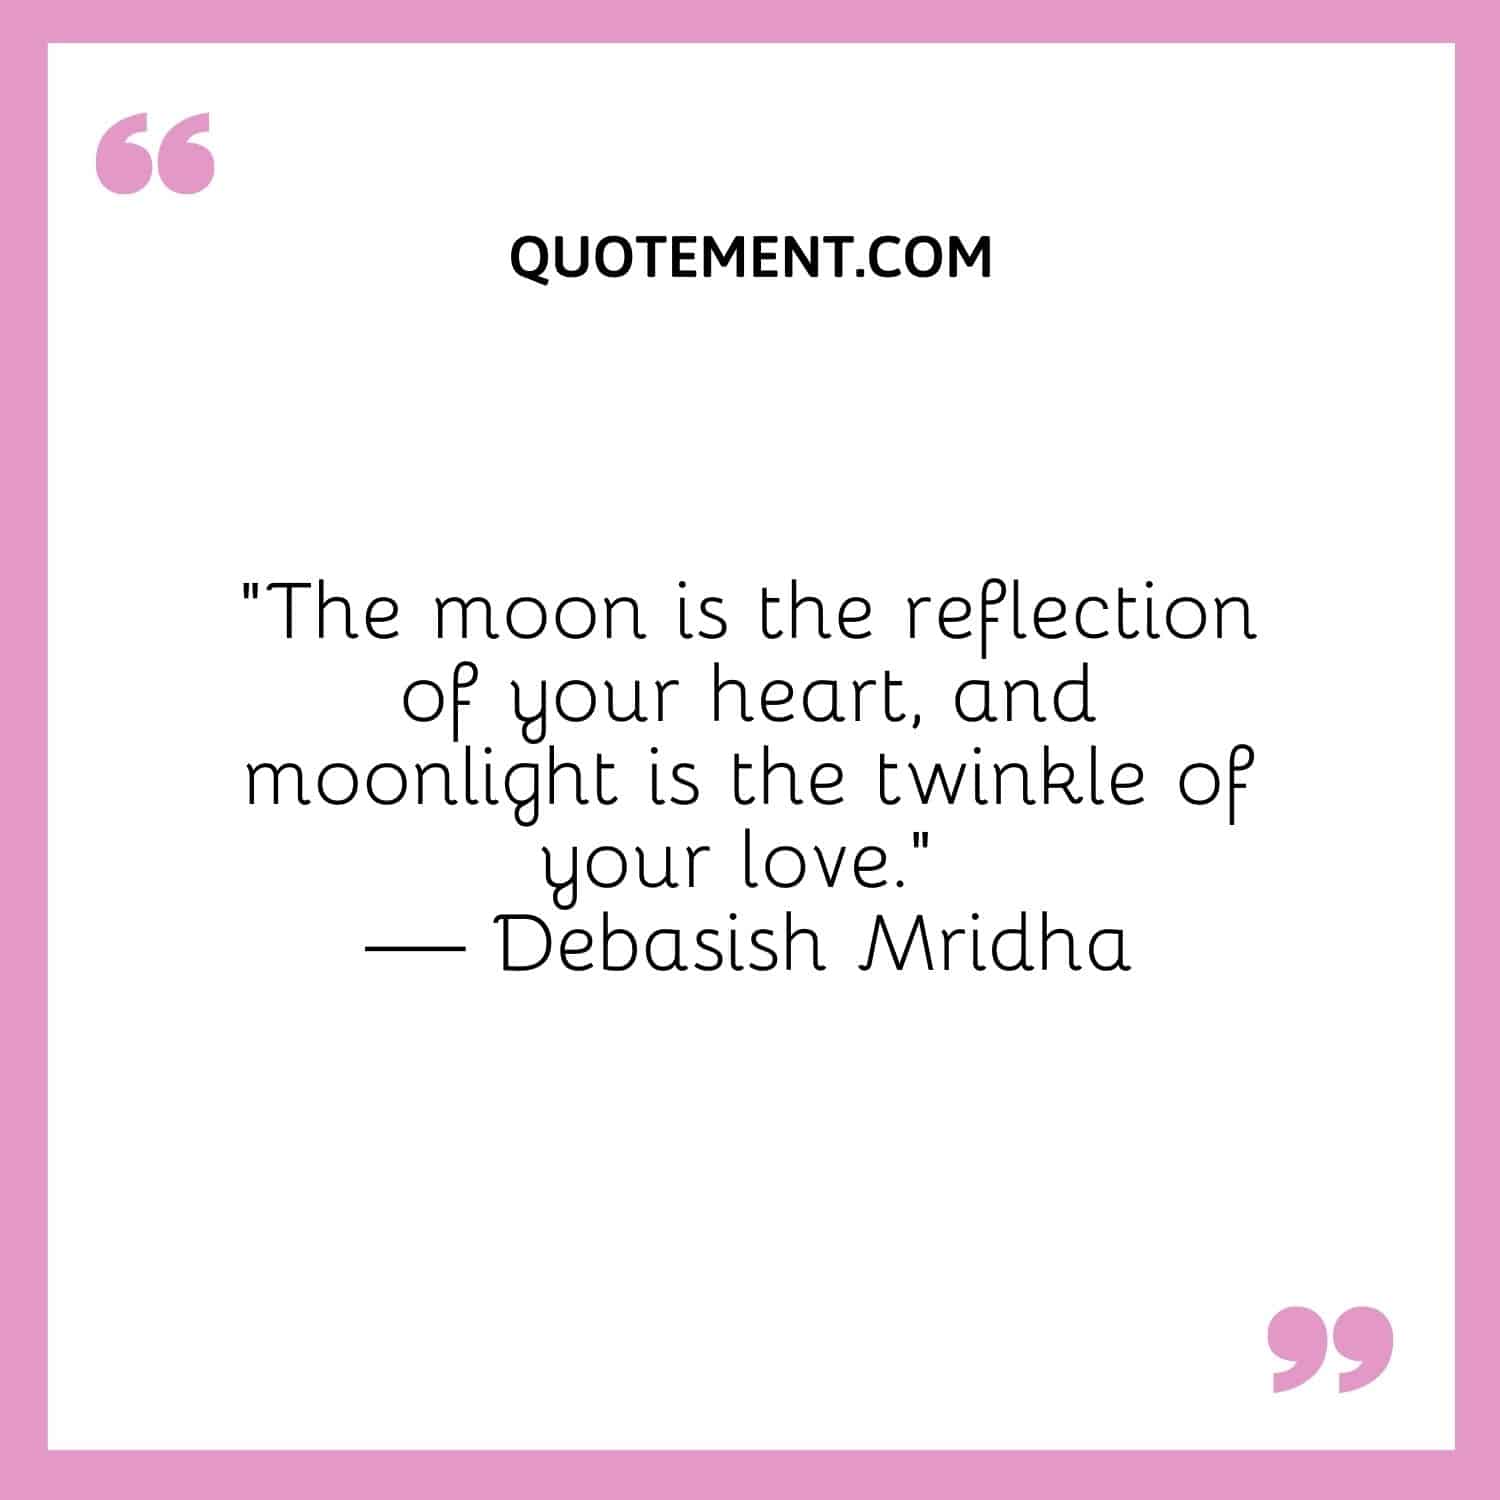 “The moon is the reflection of your heart, and moonlight is the twinkle of your love.” — Debasish Mridha